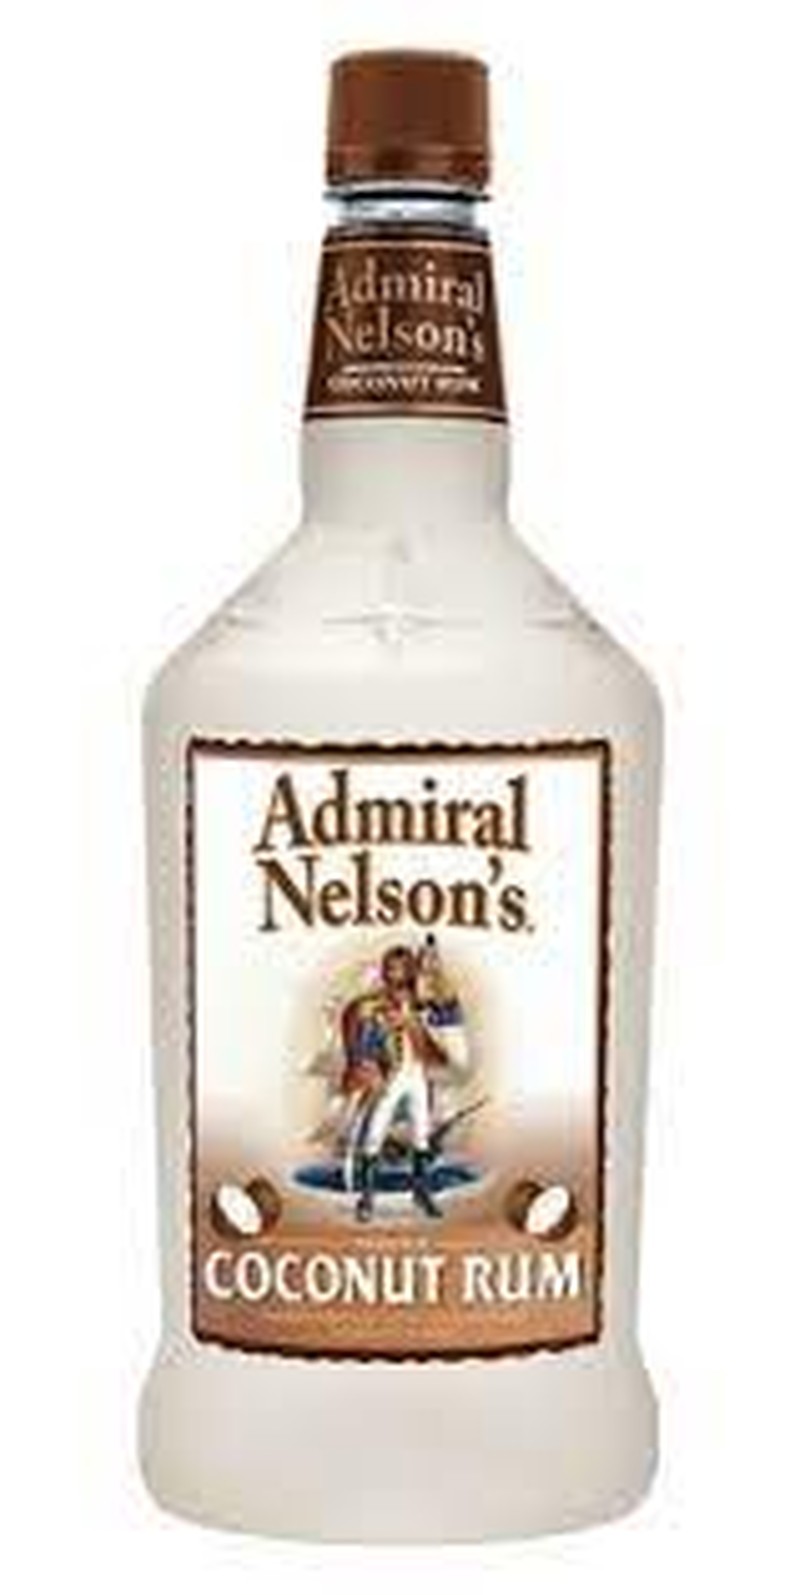 ADMIRAL NELSON'S COCONUT RUM 1.75L